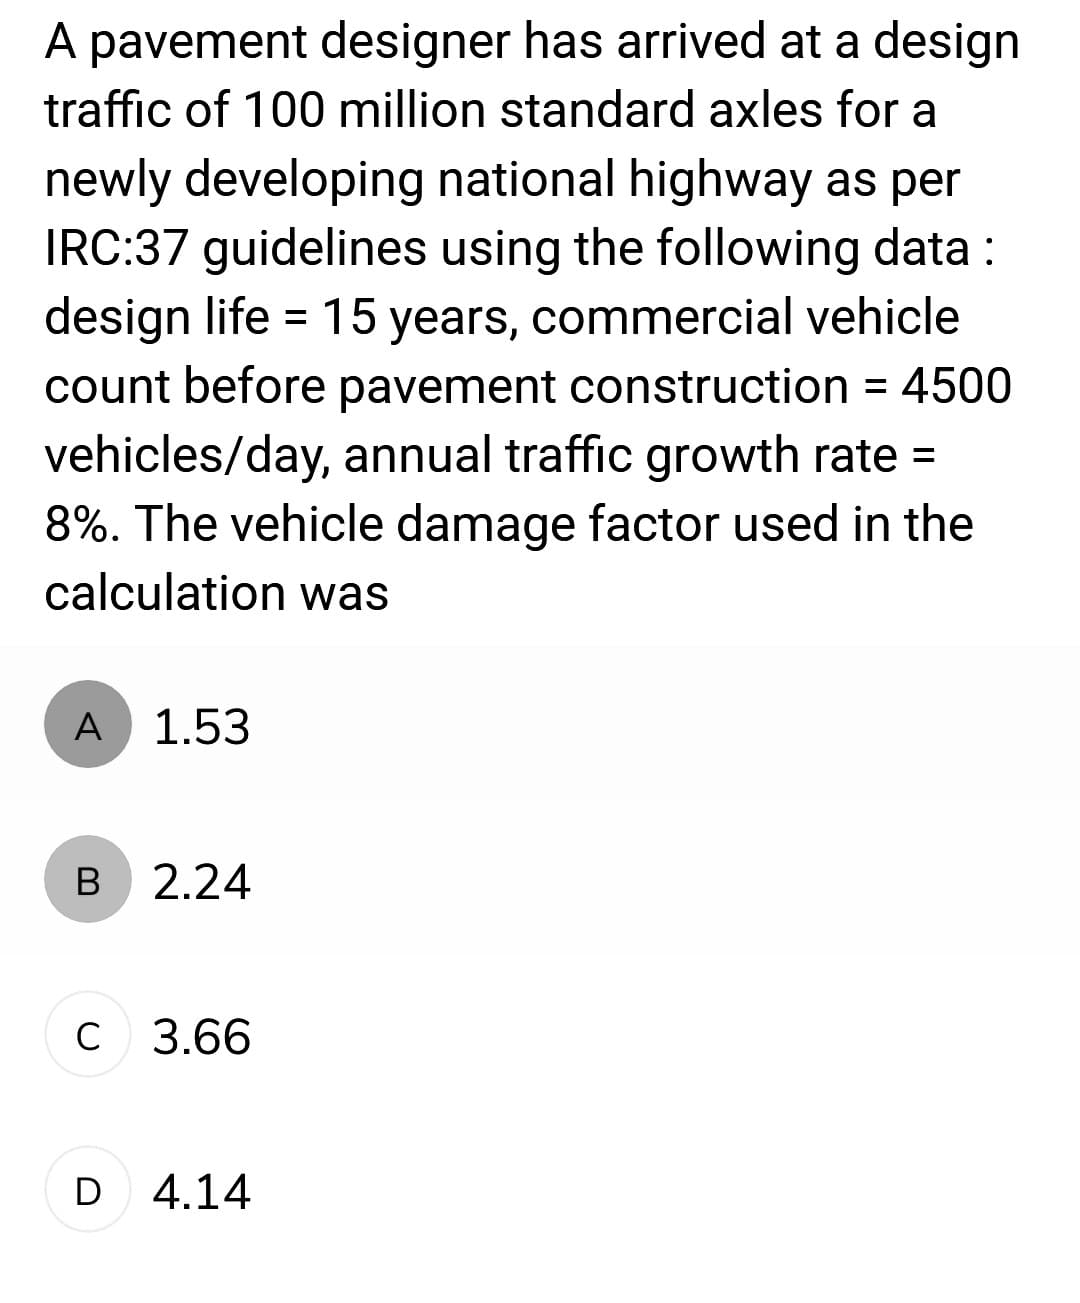 A pavement designer has arrived at a design
traffic of 100 million standard axles for a
newly developing national highway as per
IRC:37 guidelines using the following data:
design life = 15 years, commercial vehicle
count before pavement construction = 4500
vehicles/day, annual traffic growth rate =
8%. The vehicle damage factor used in the
calculation was
A
B
1.53
2.24
с 3.66
D 4.14